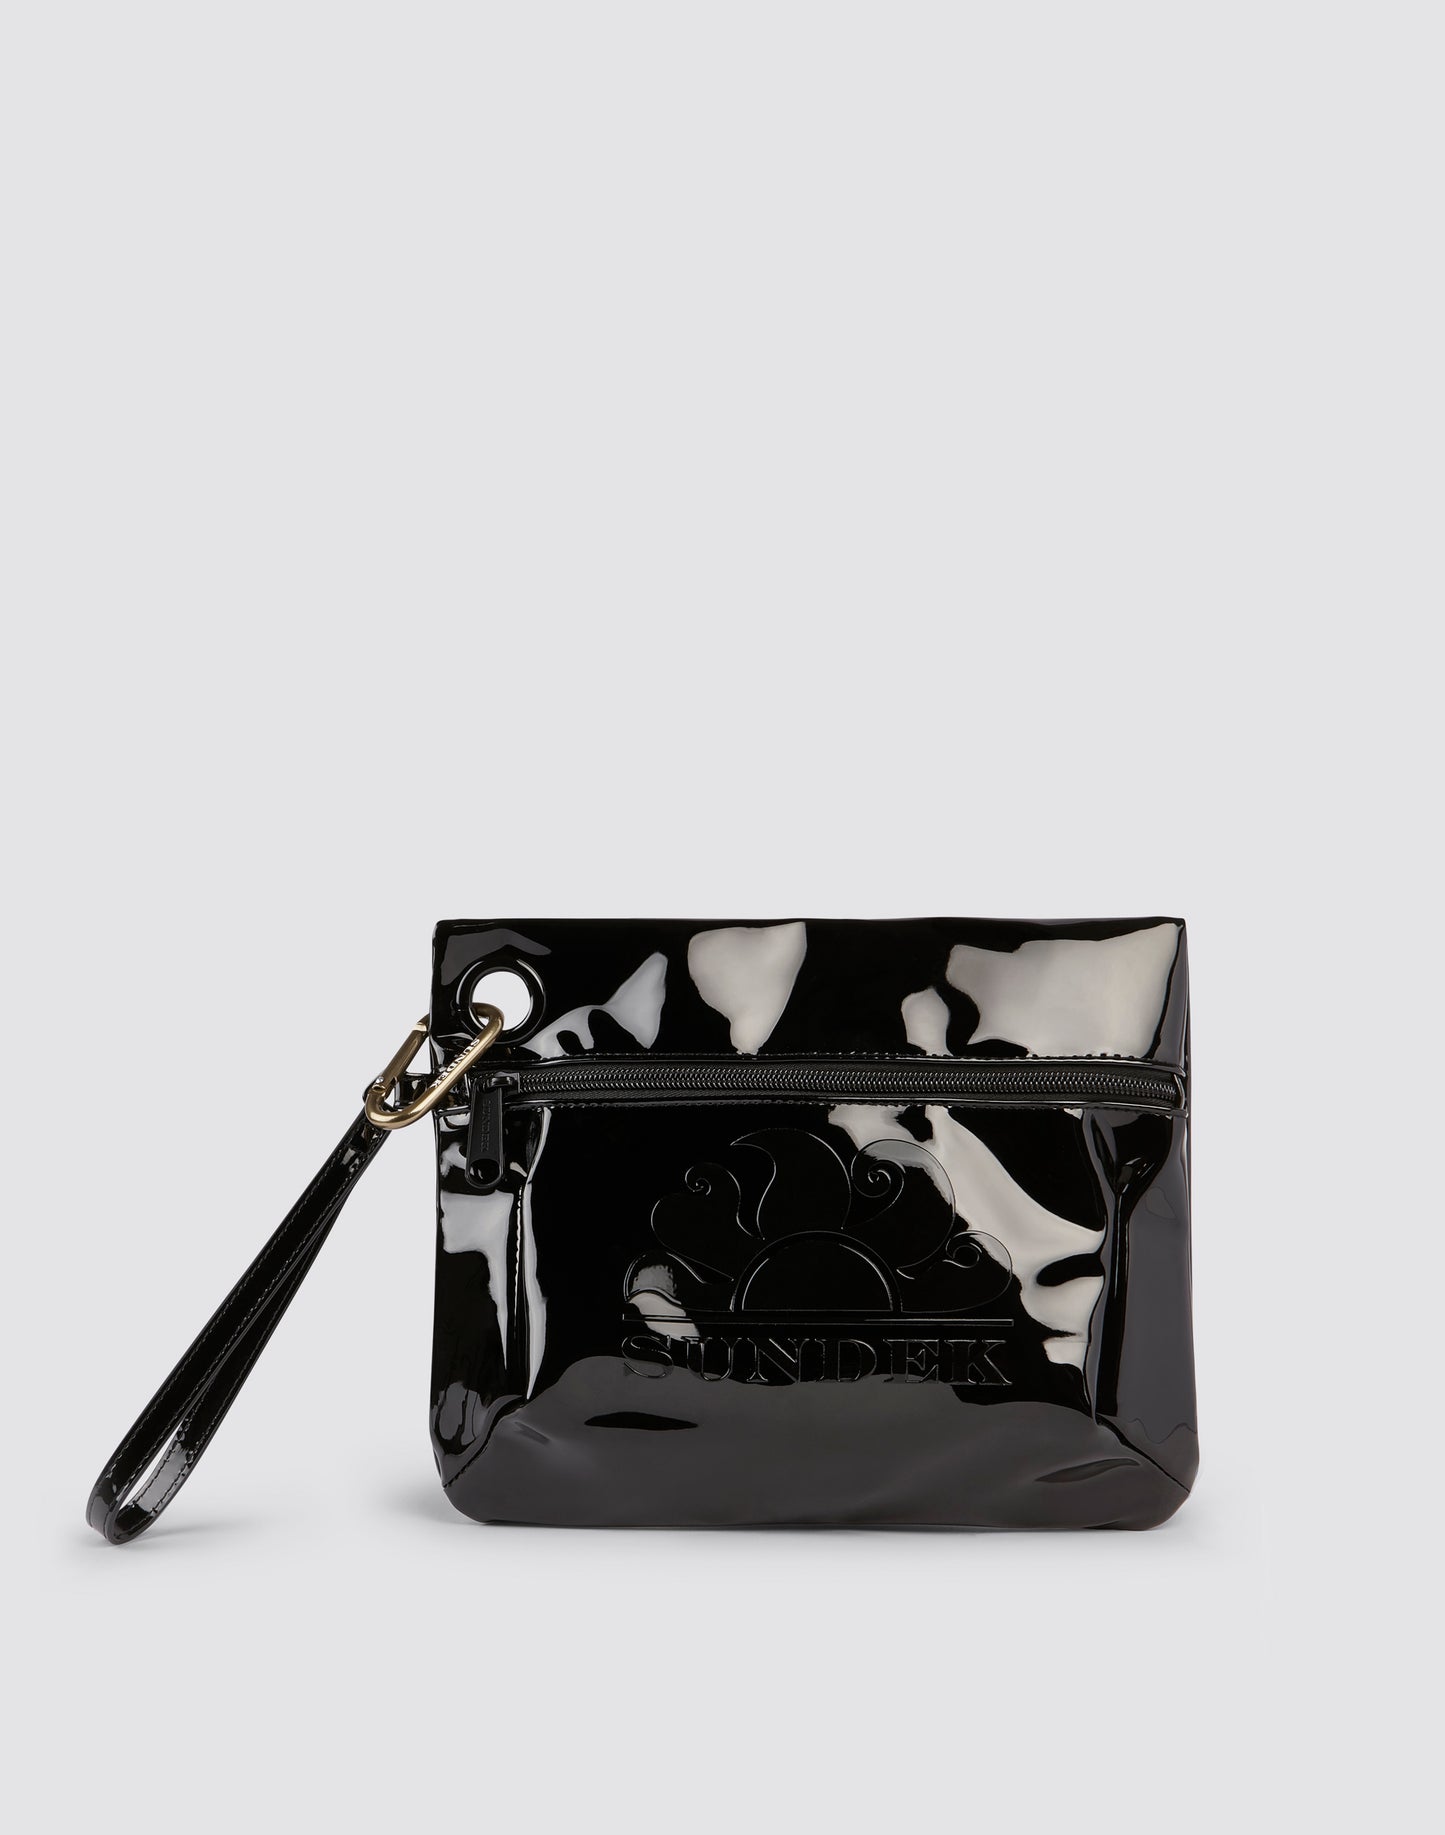 CLUTCH BAG WITH CARABINER